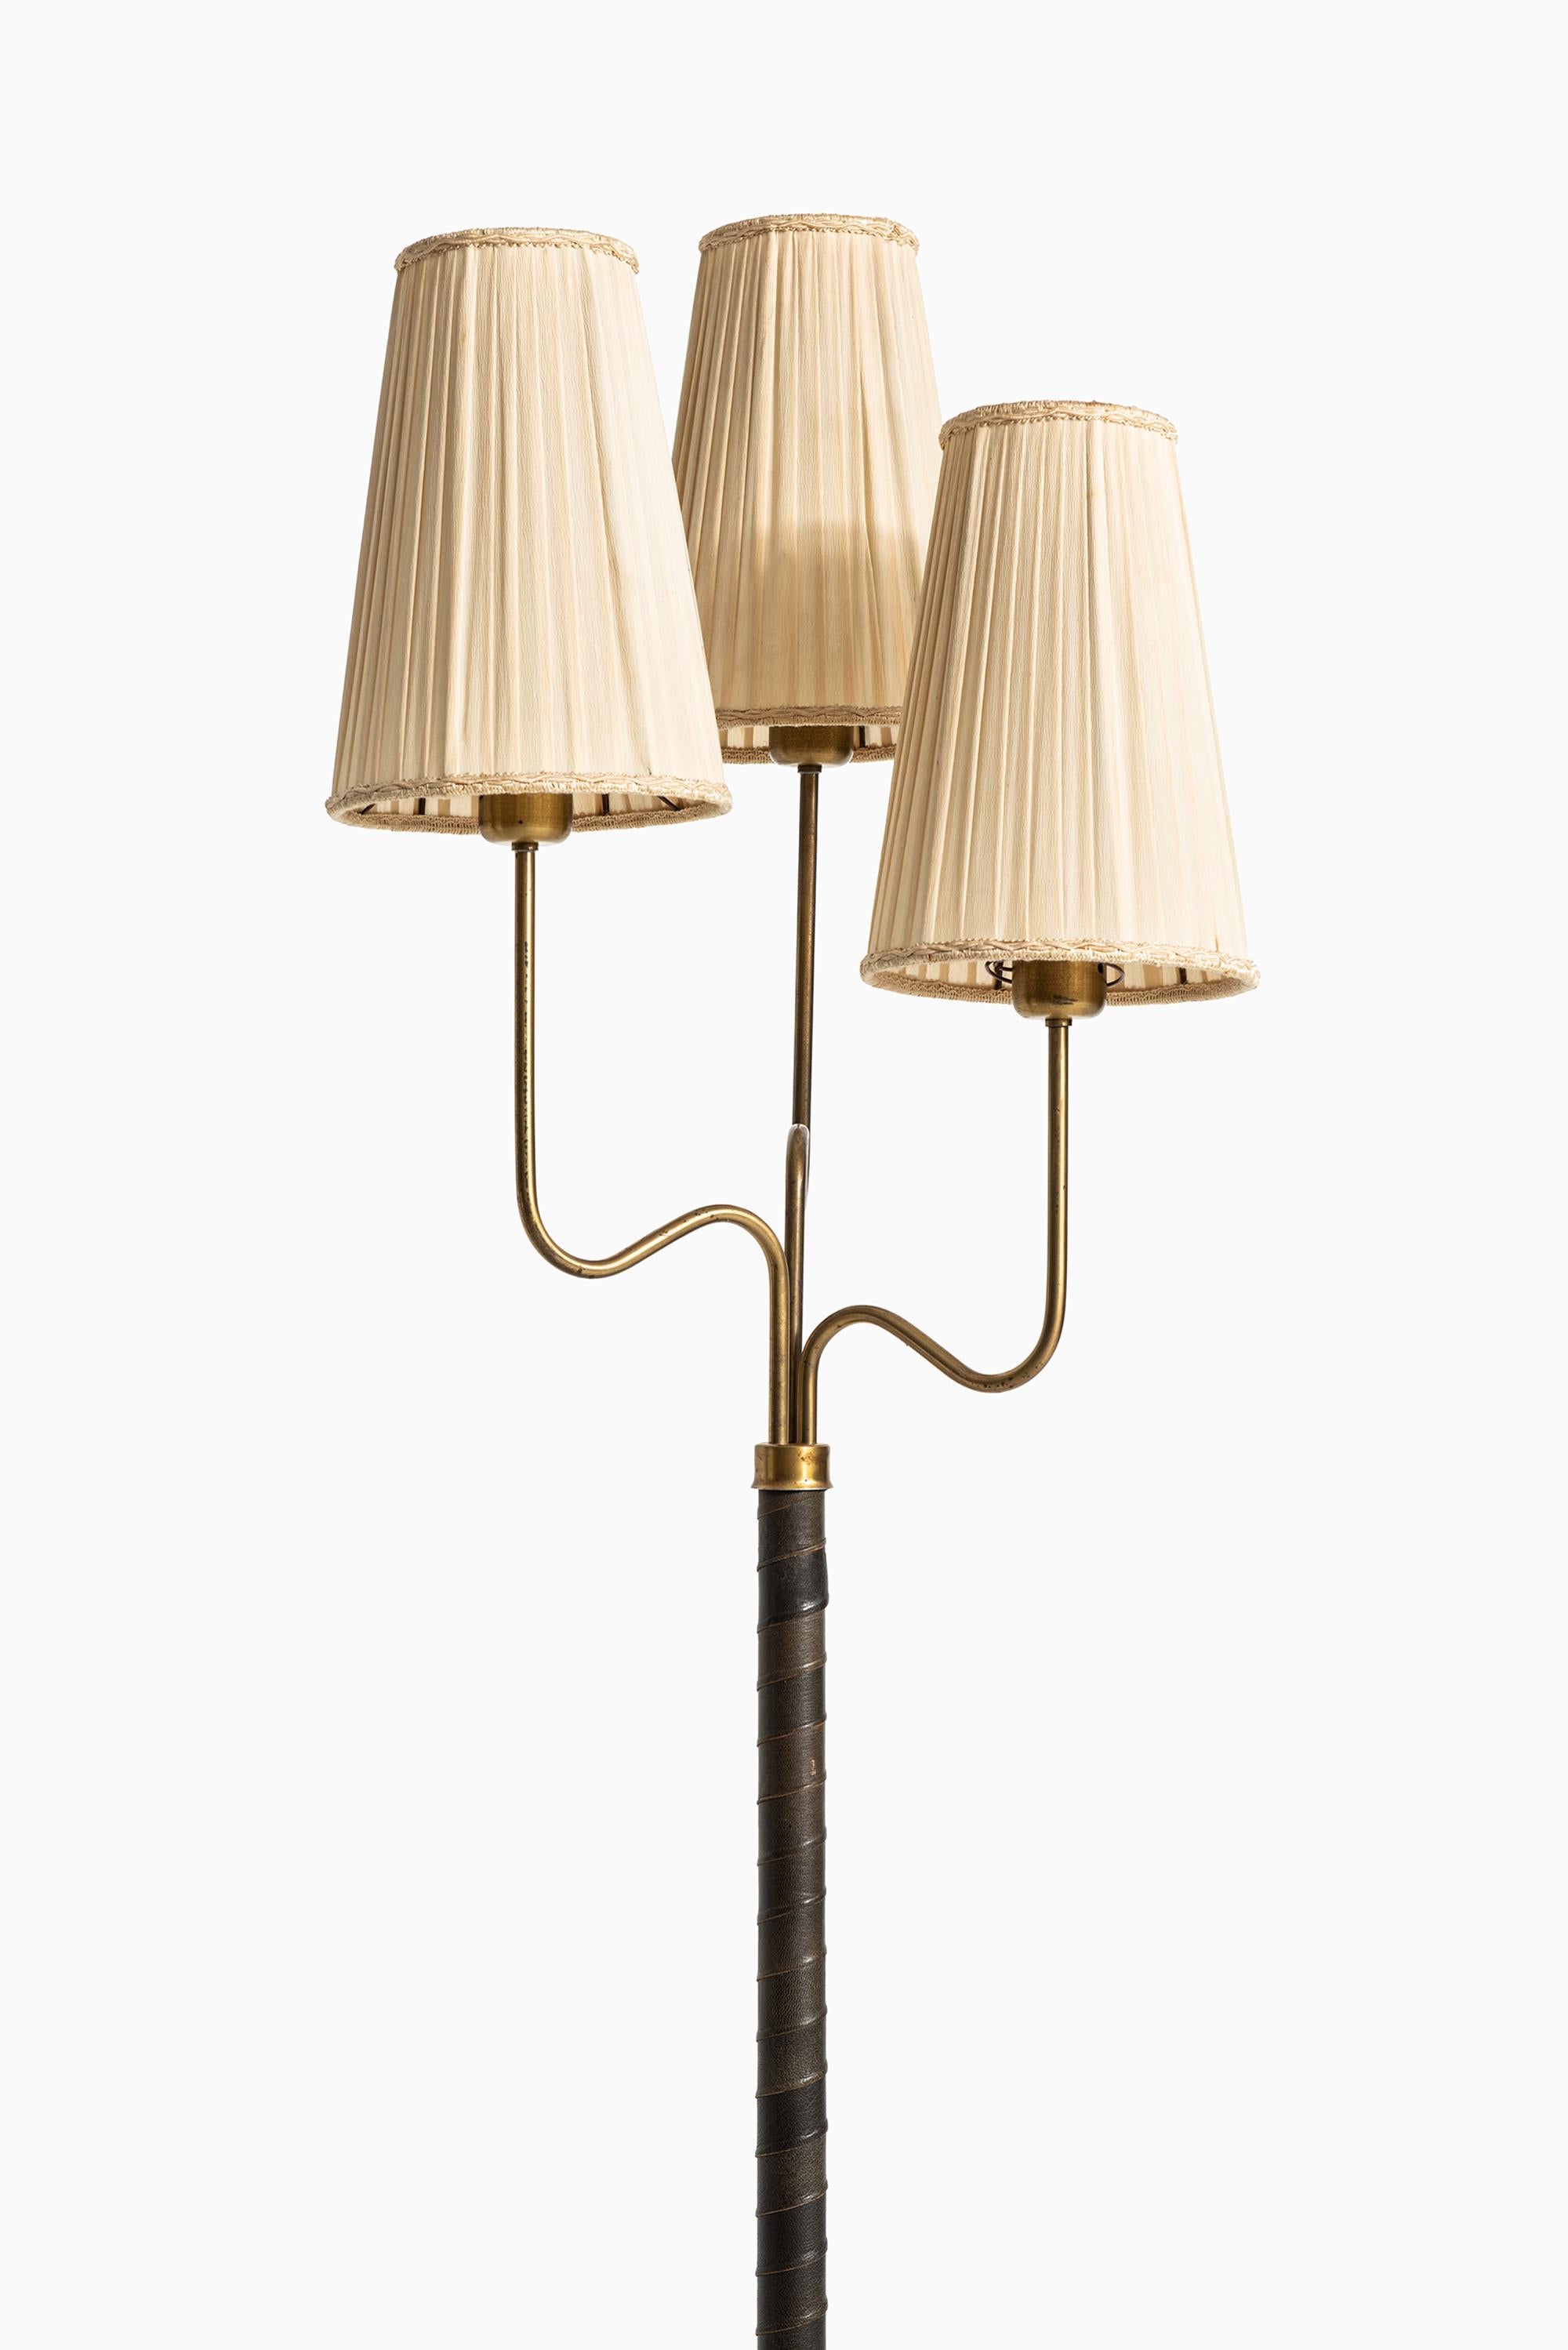 Scandinavian Modern Hans Bergström Floor Lamp with 3 Arms Produced by ASEA in Sweden